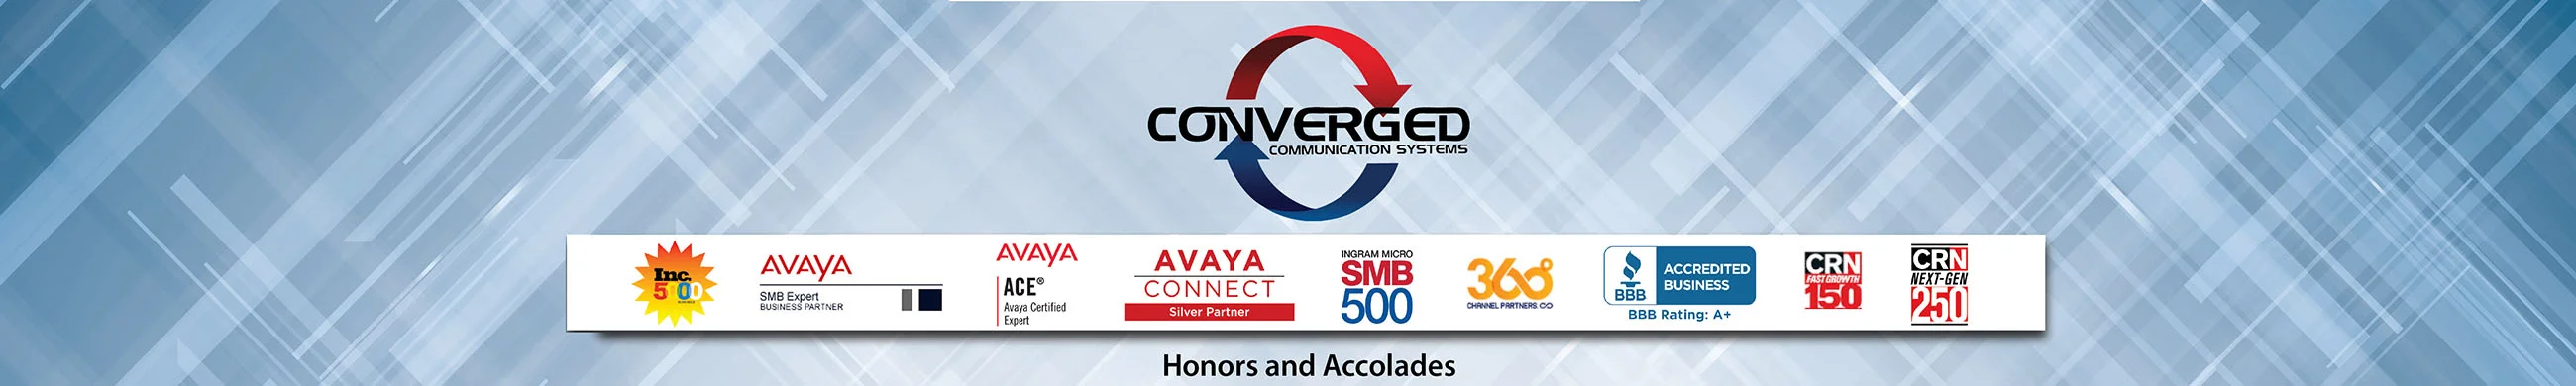 Converged awards and accolades